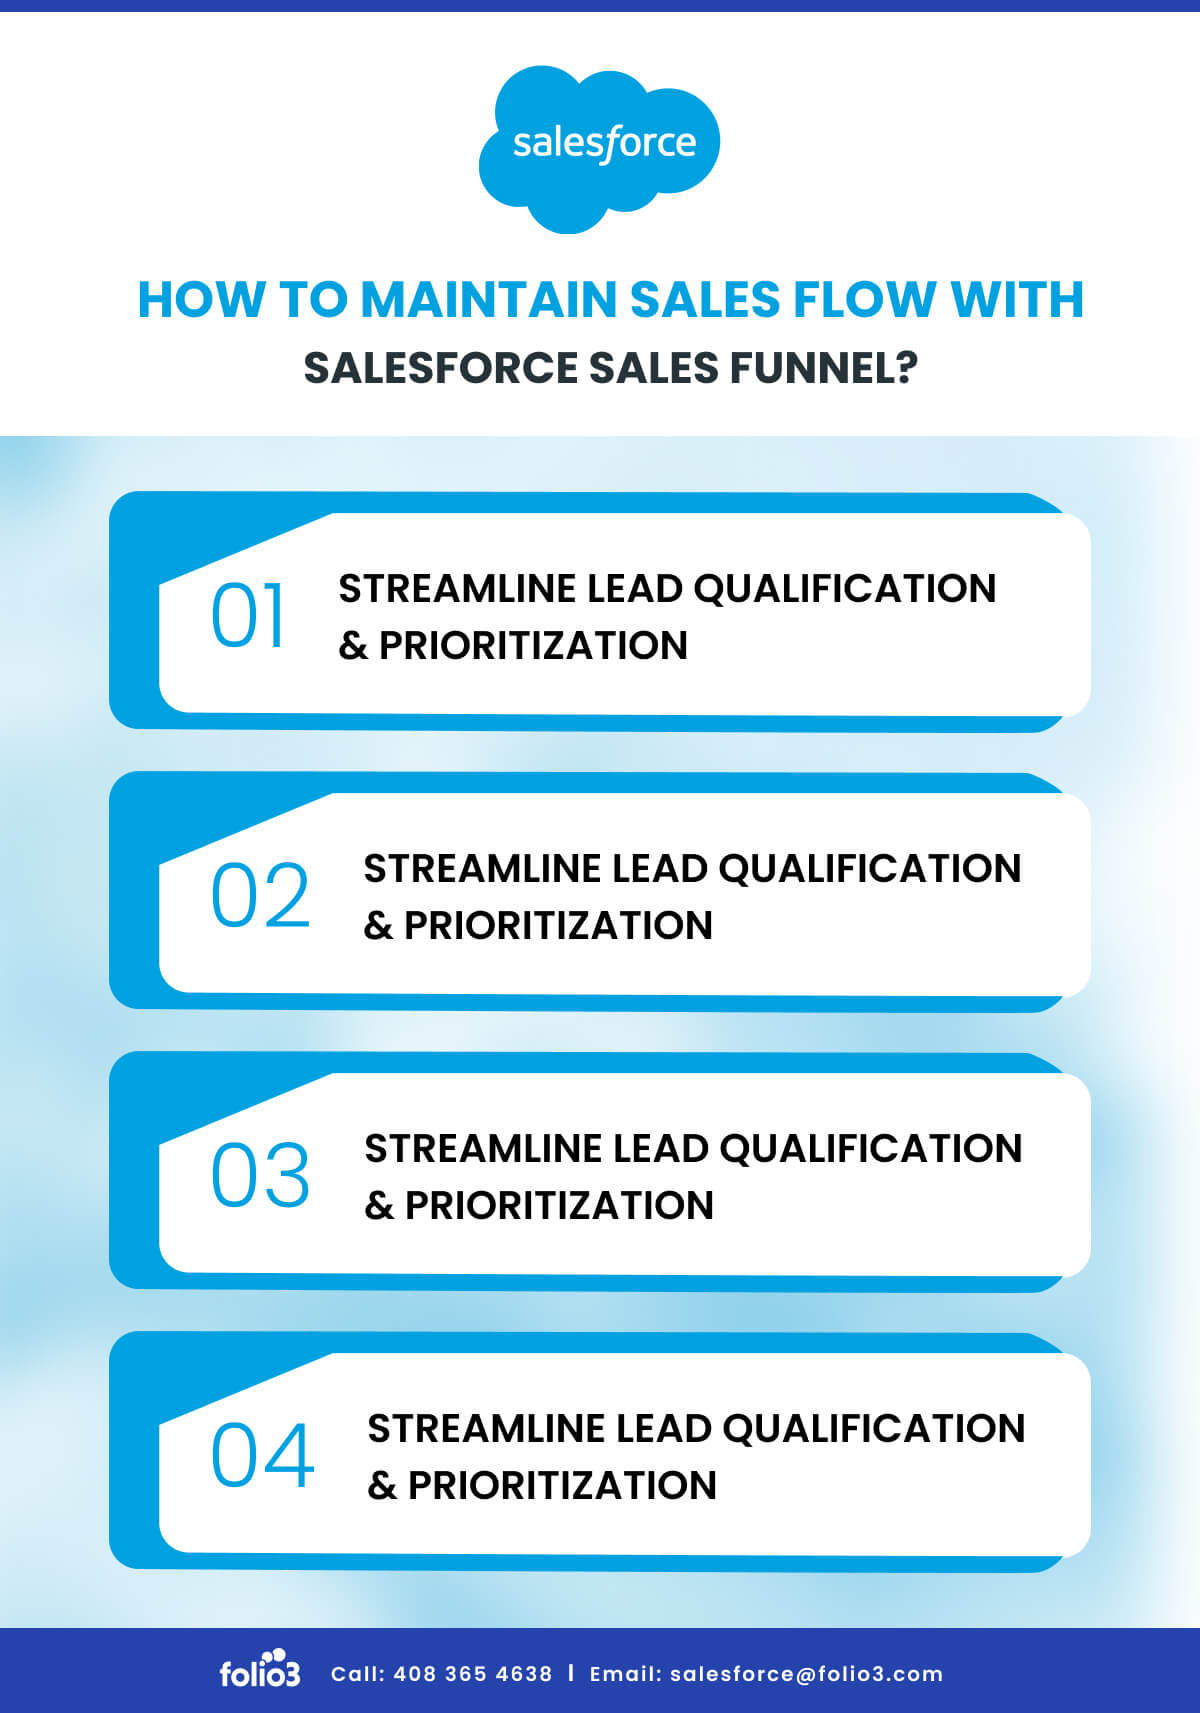 How to Maintain Sales Flow With Salesforce Sales Funnel